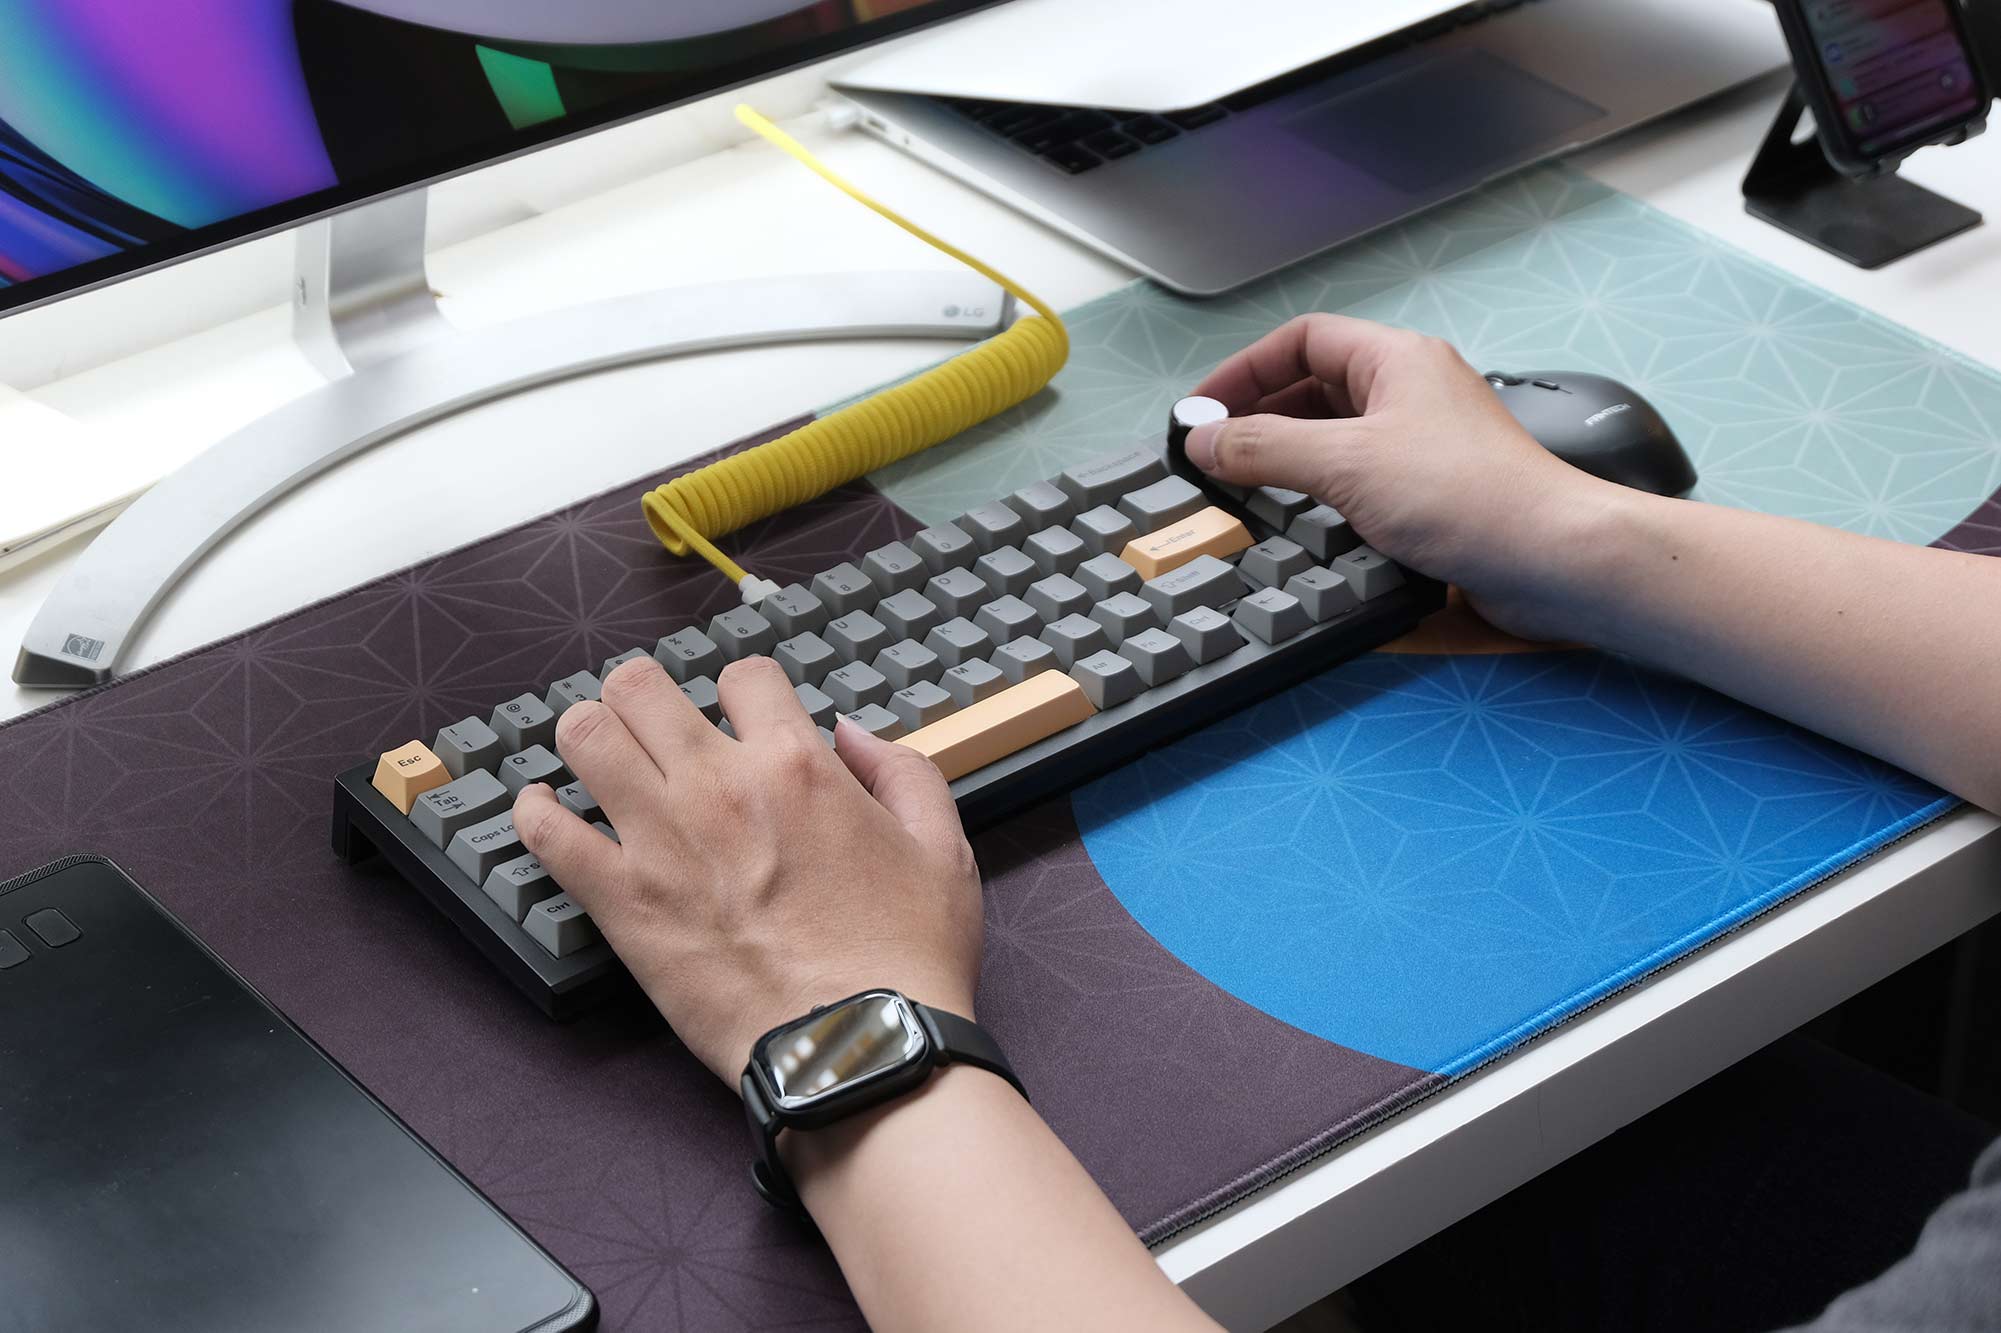 How to Reduce Wrist Pain When Typing on a Keyboard!